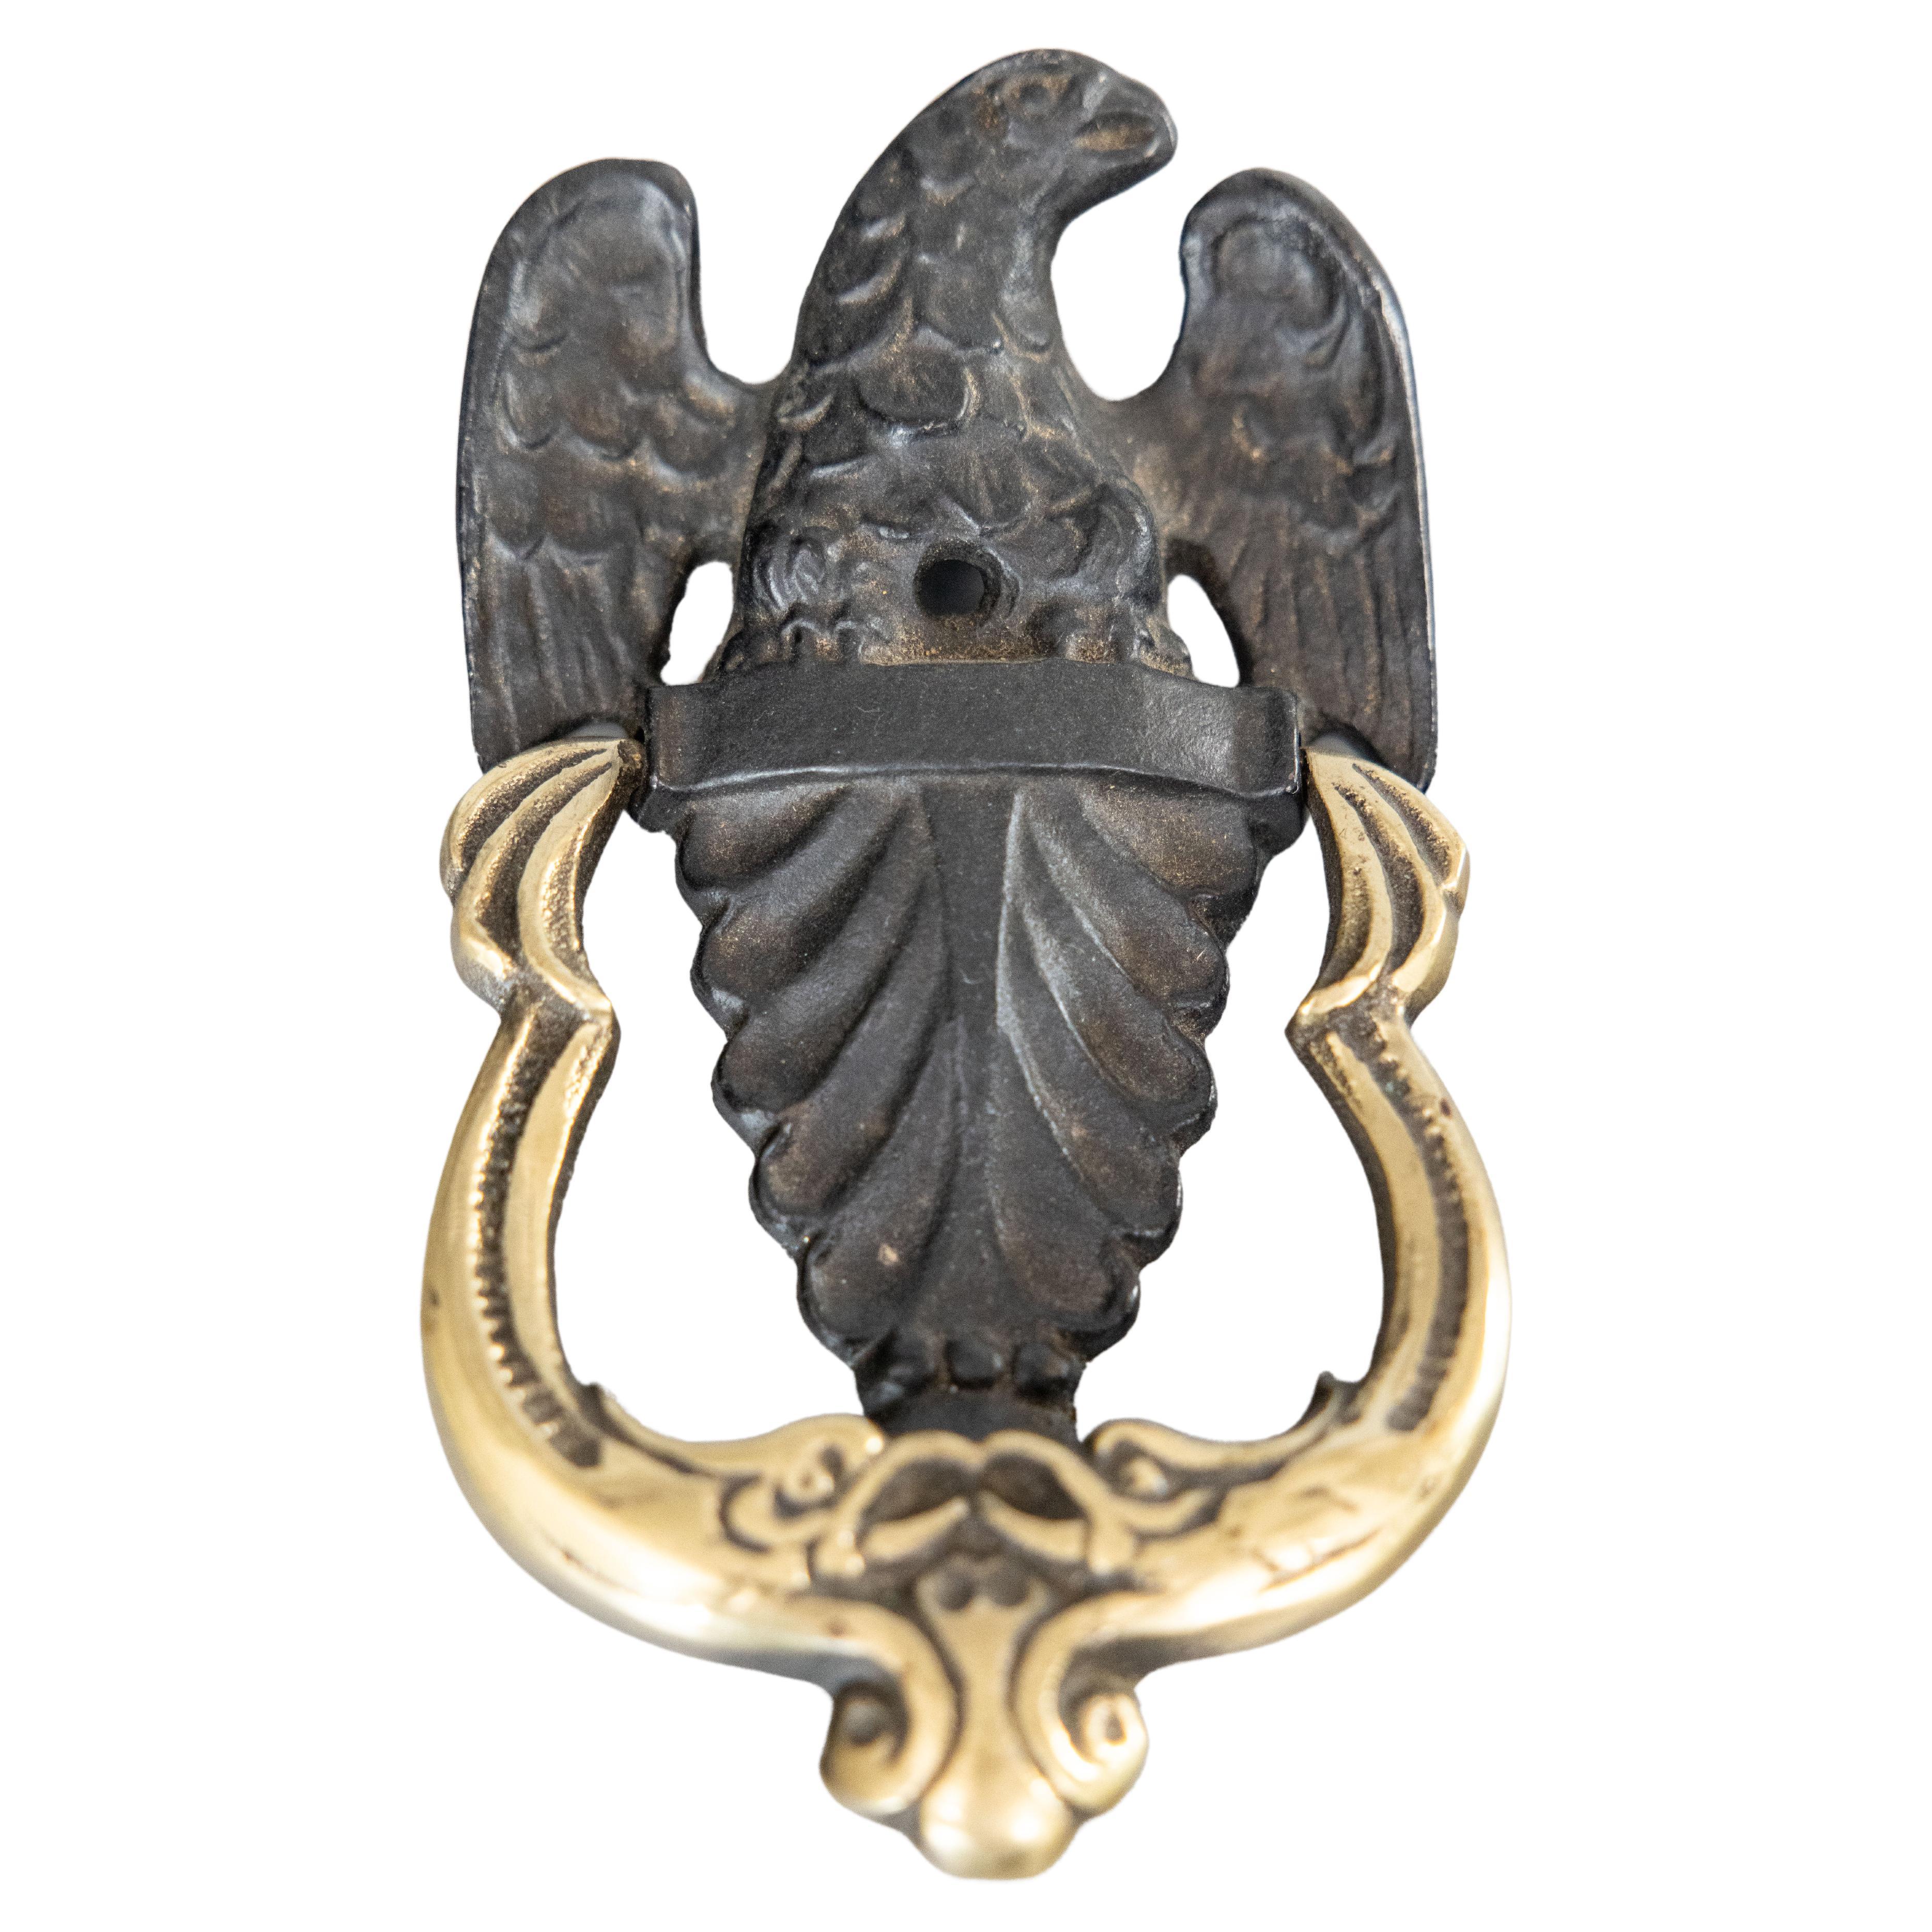 Early 20th Century American Cast Iron & Brass Federal Eagle Door Knocker